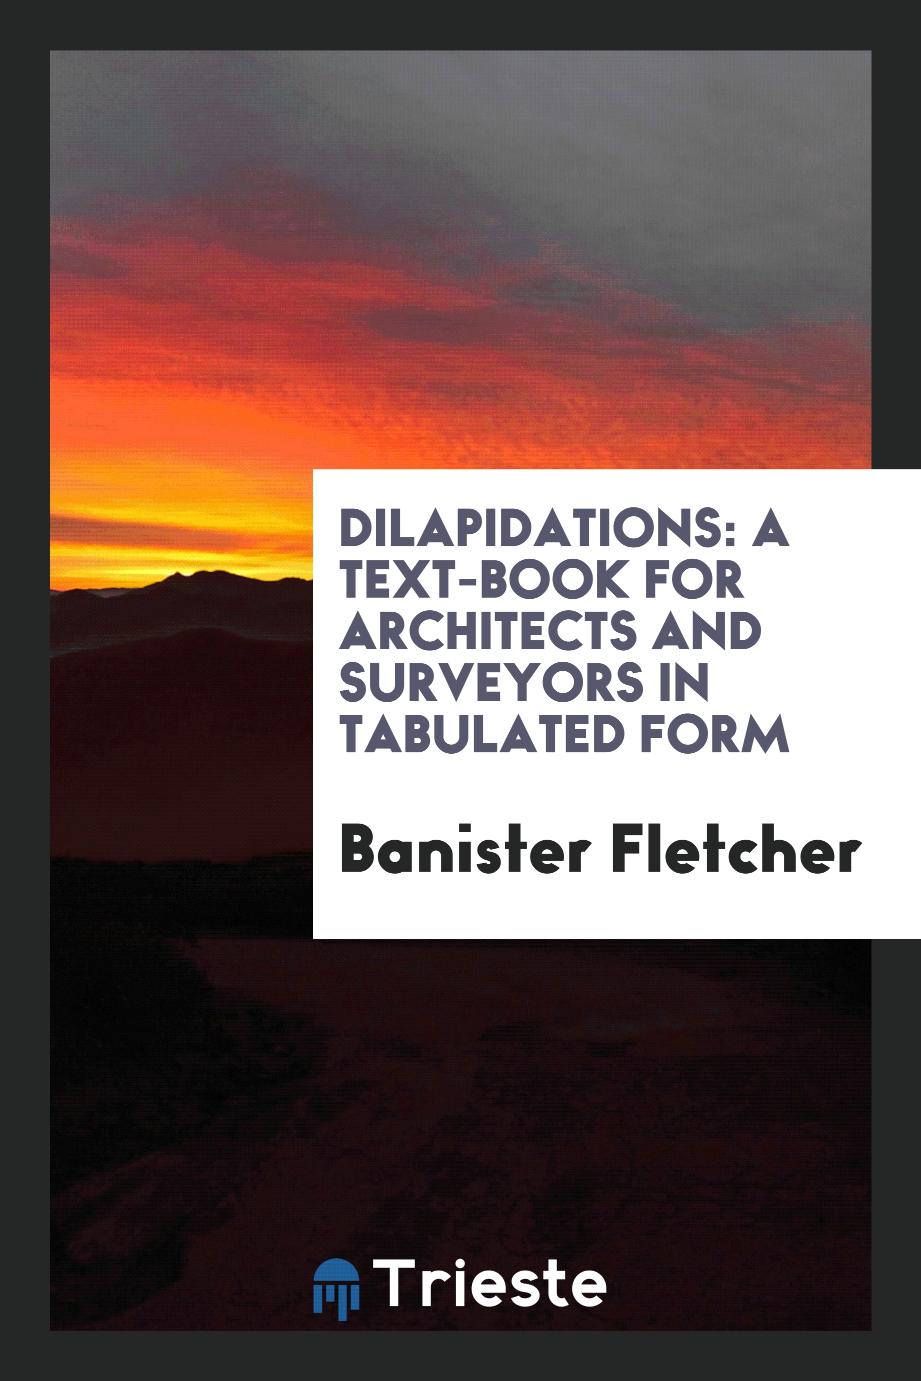 Banister Fletcher - Dilapidations: A Text-Book for Architects and Surveyors in Tabulated Form